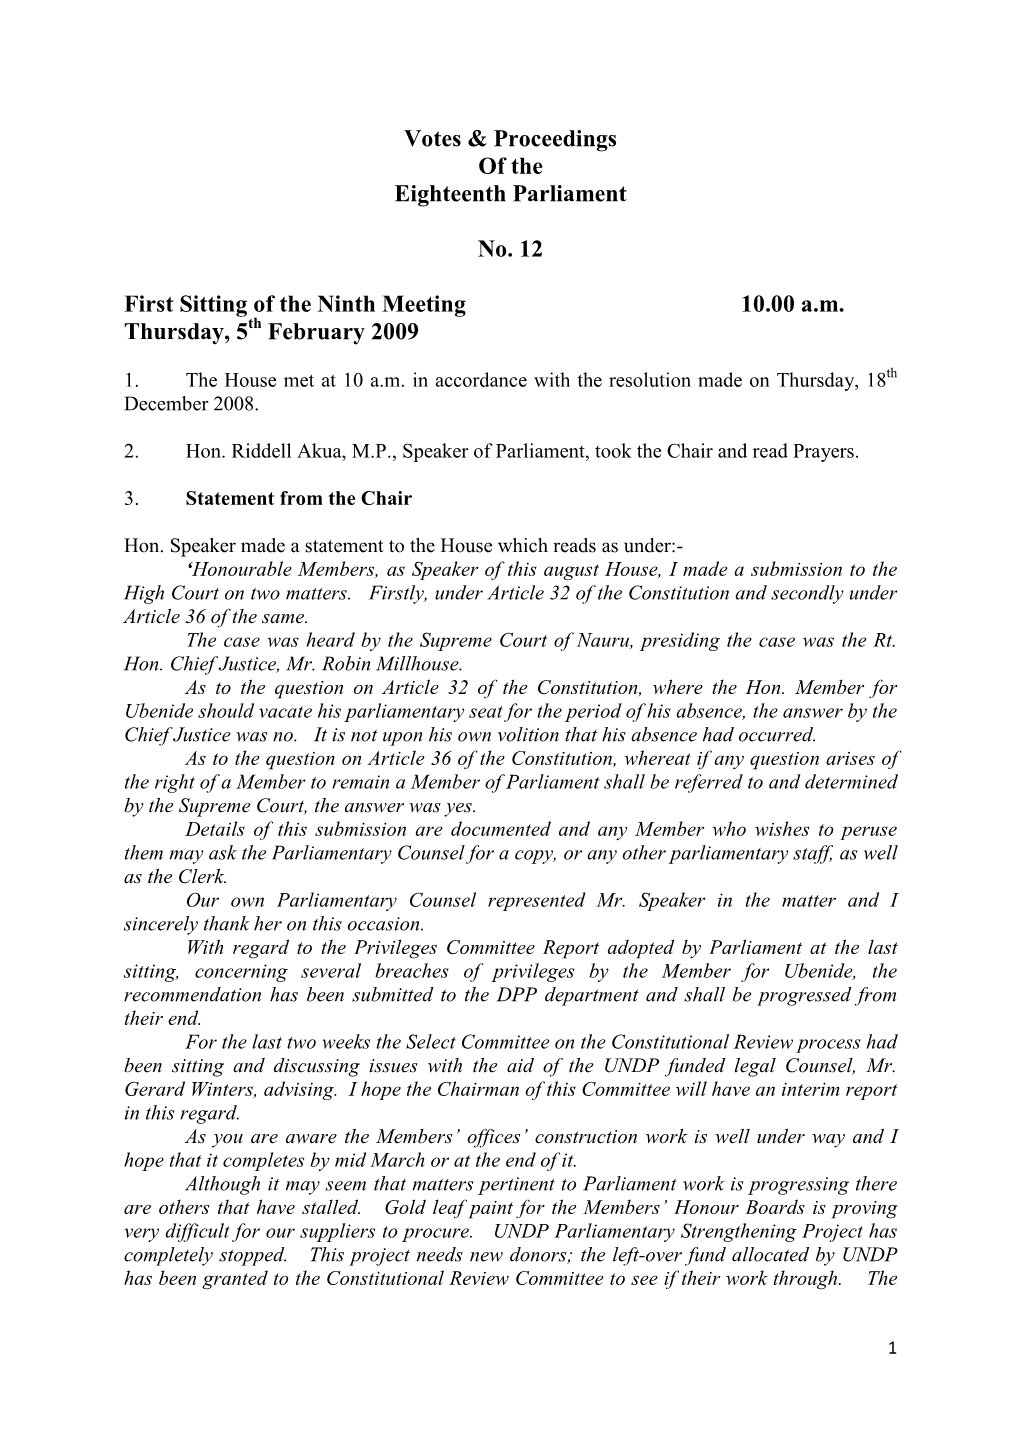 Votes & Proceedings of the Eighteenth Parliament No. 12 First Sitting of the Ninth Meeting 10.00 A.M. Thursday, 5 February